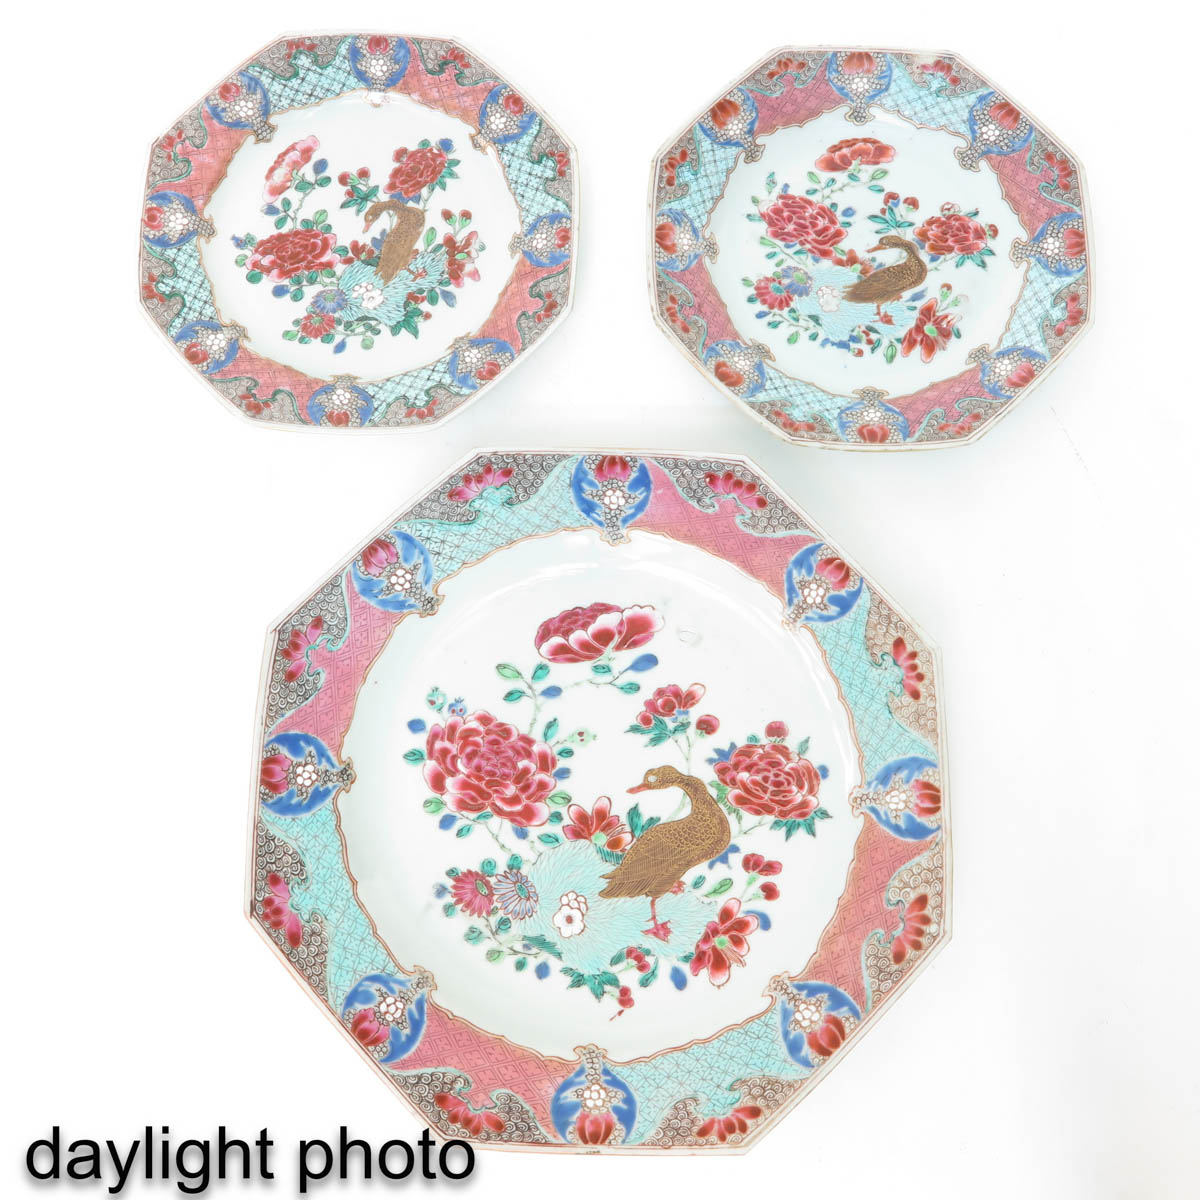 A Series of 3 Famille Rose Plates - Image 9 of 10